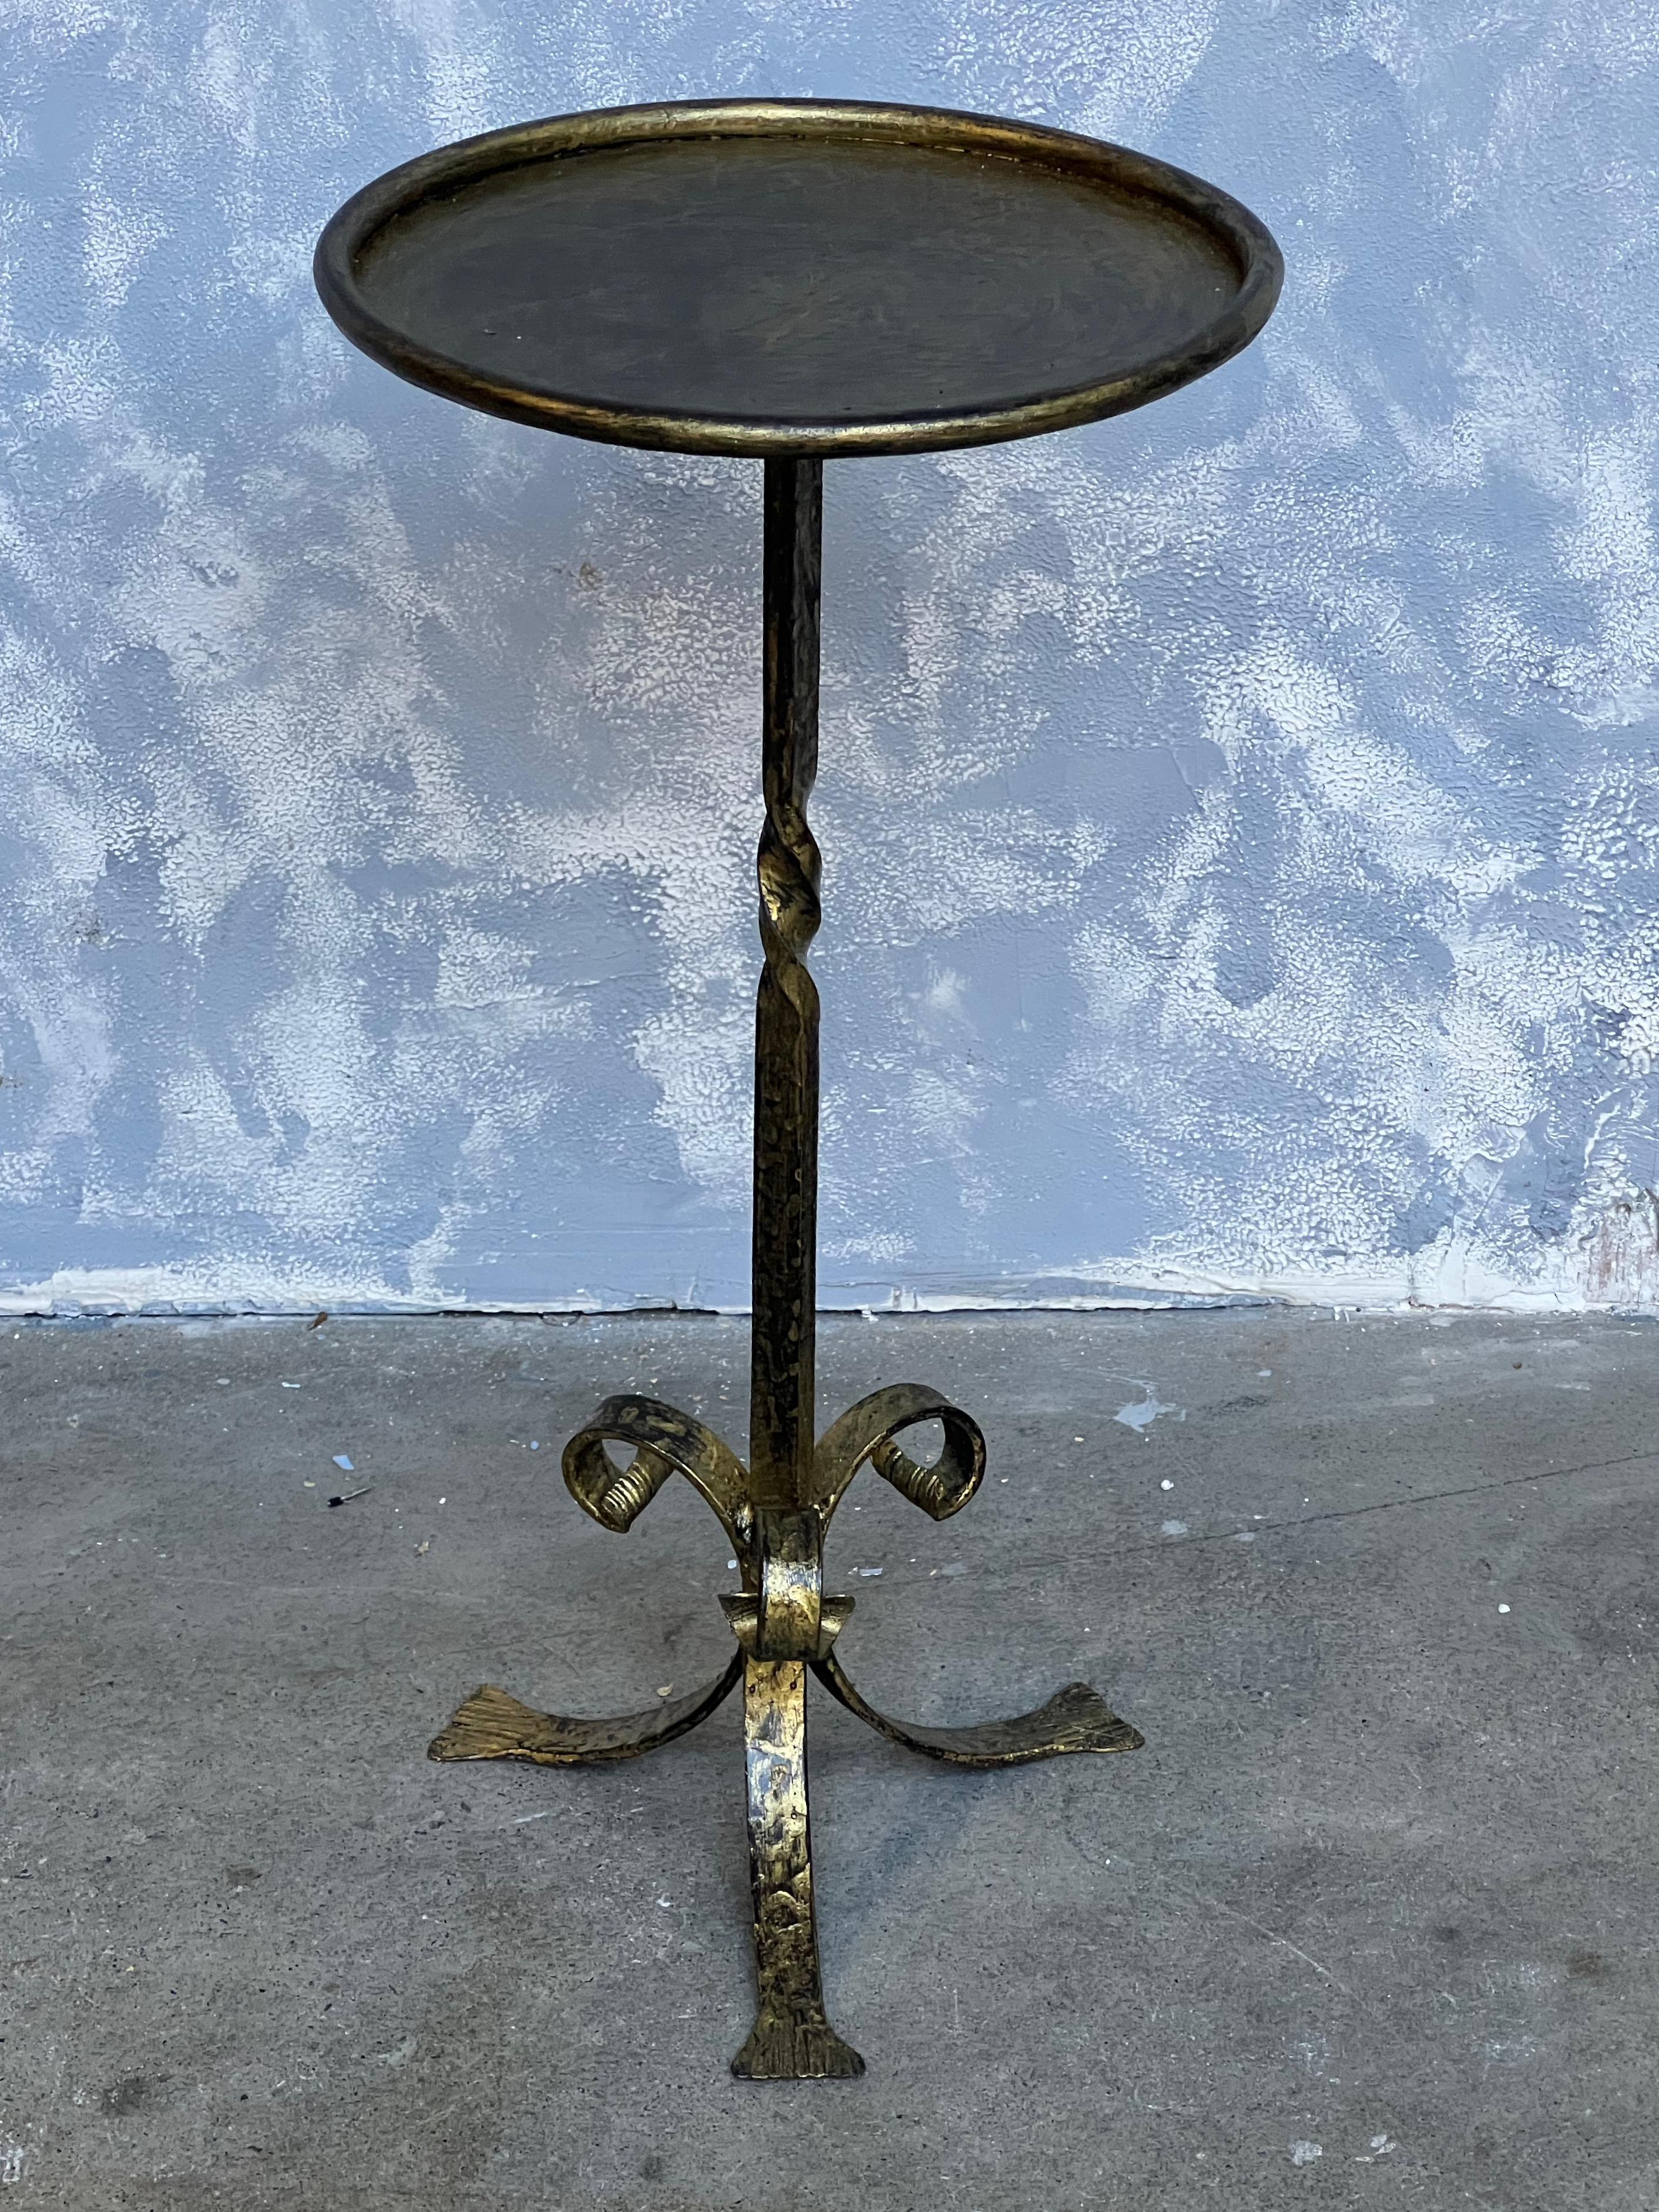 A small gilt iron side table that is perfect as a drinks table that can be moved around as needed. The hand patinated gilt finish has just the right amount of gold over a darker black undercoat to add texture and dimension to show off the age of the